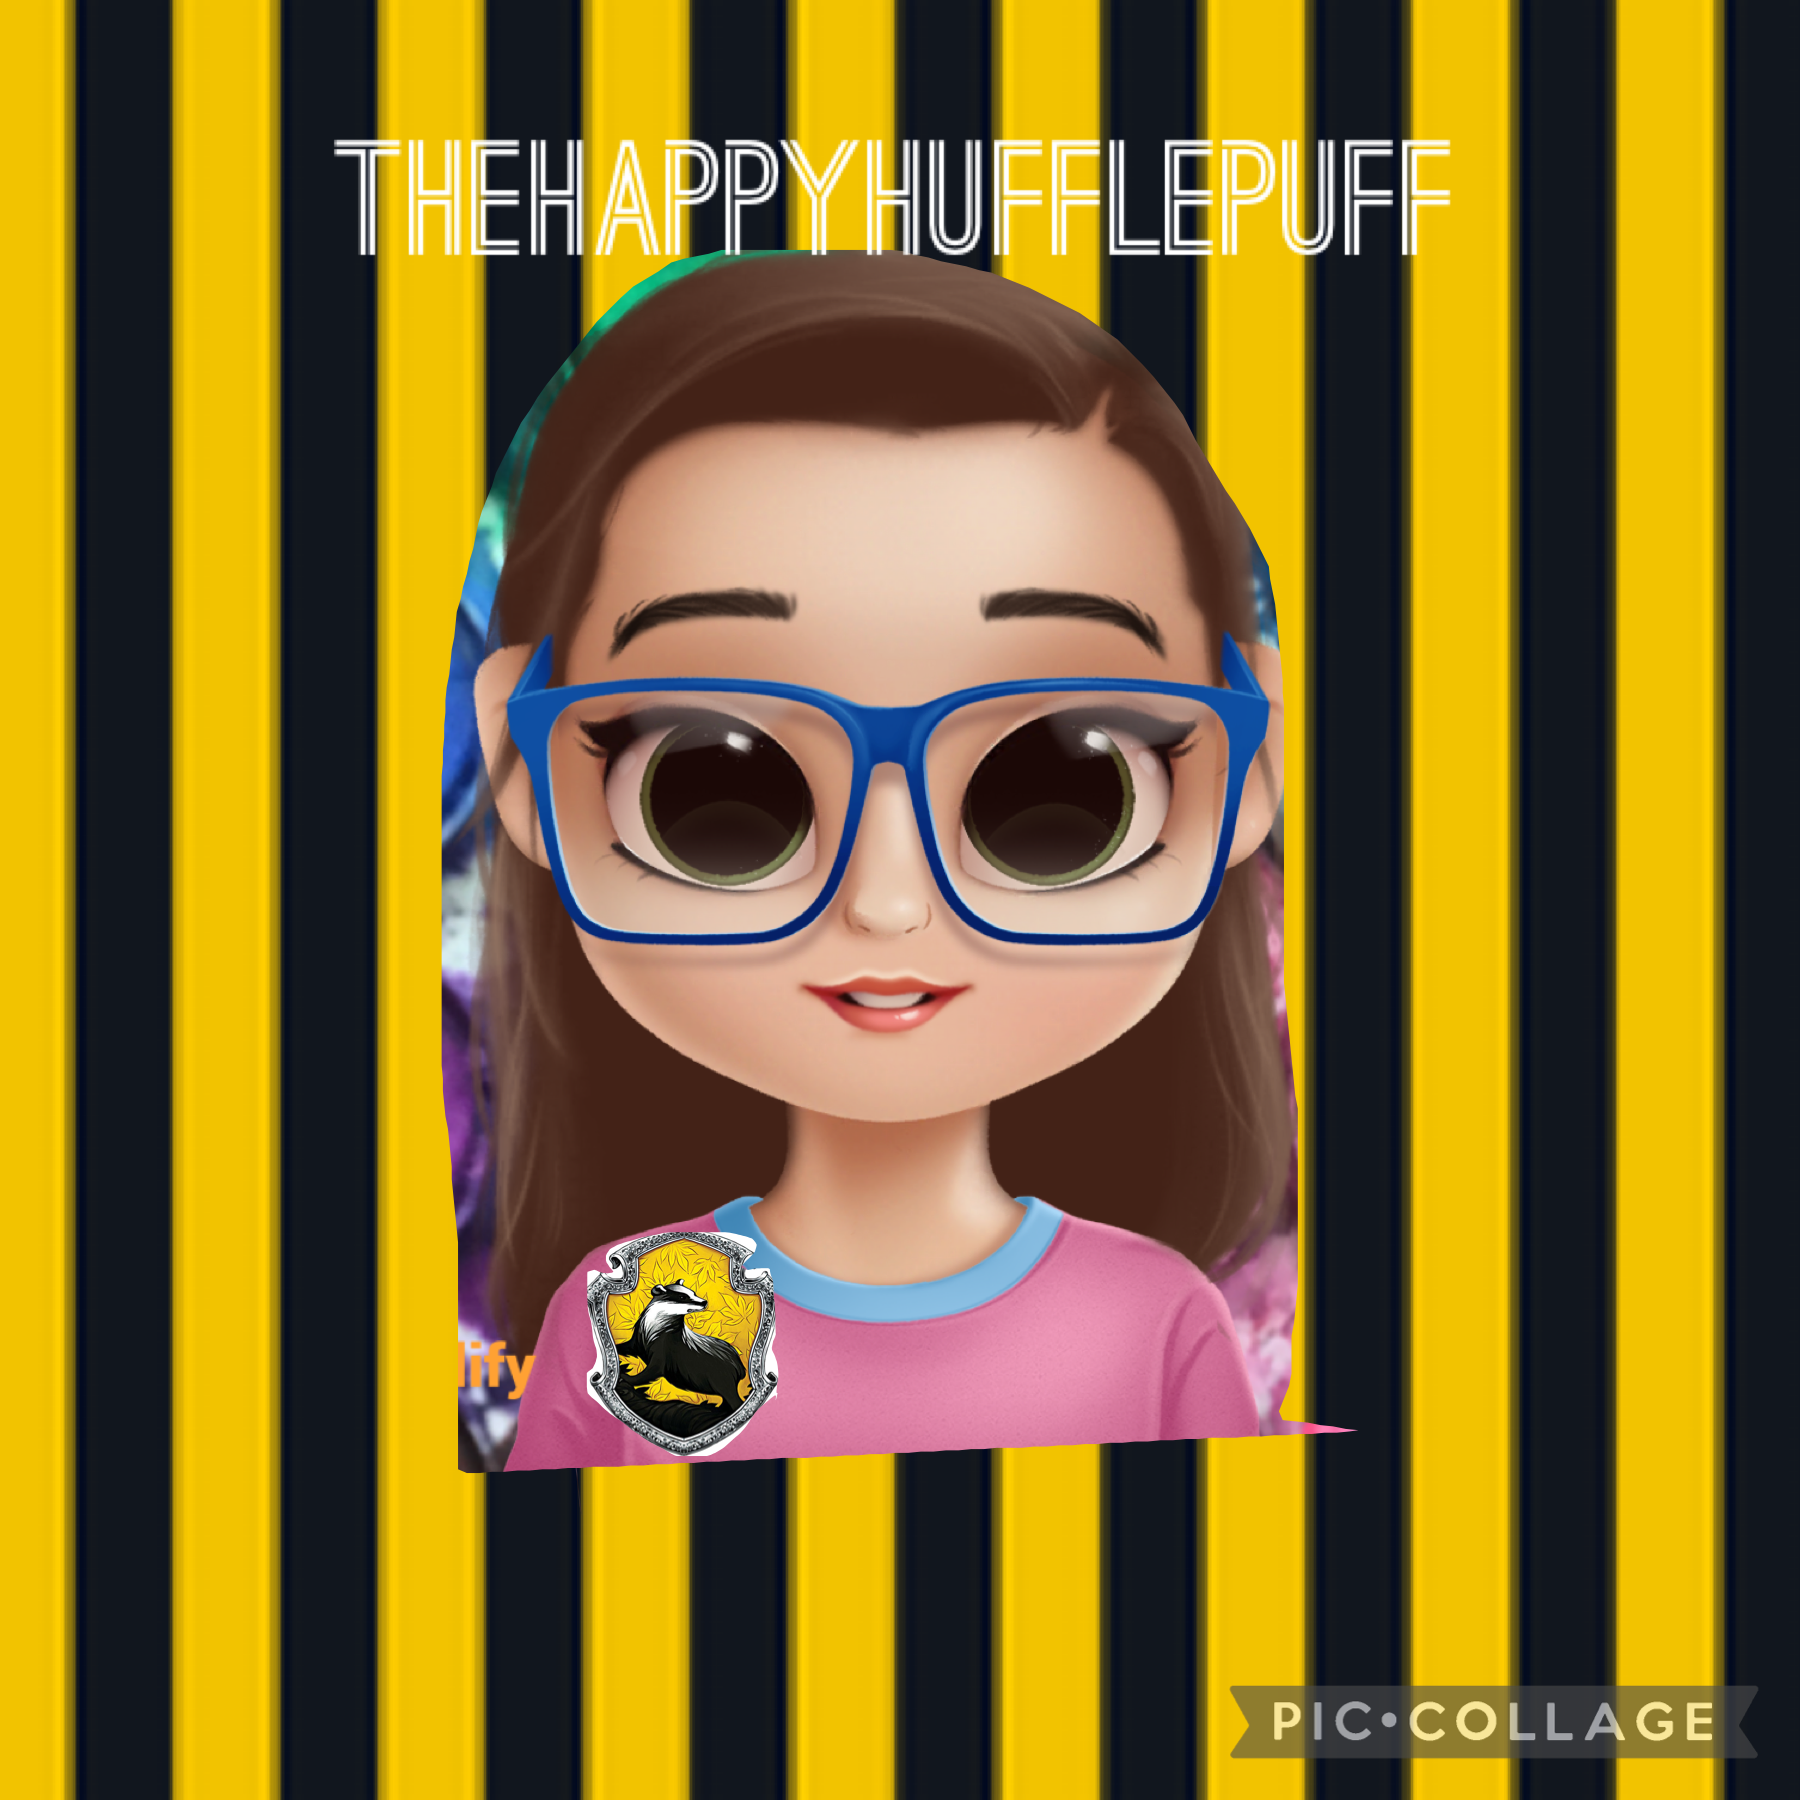 🌈 Tap🌈

This is my pfp. It includes:
My dollify
My username 
Hufflepuff background
Hufflepuff logo

I hope you like it!